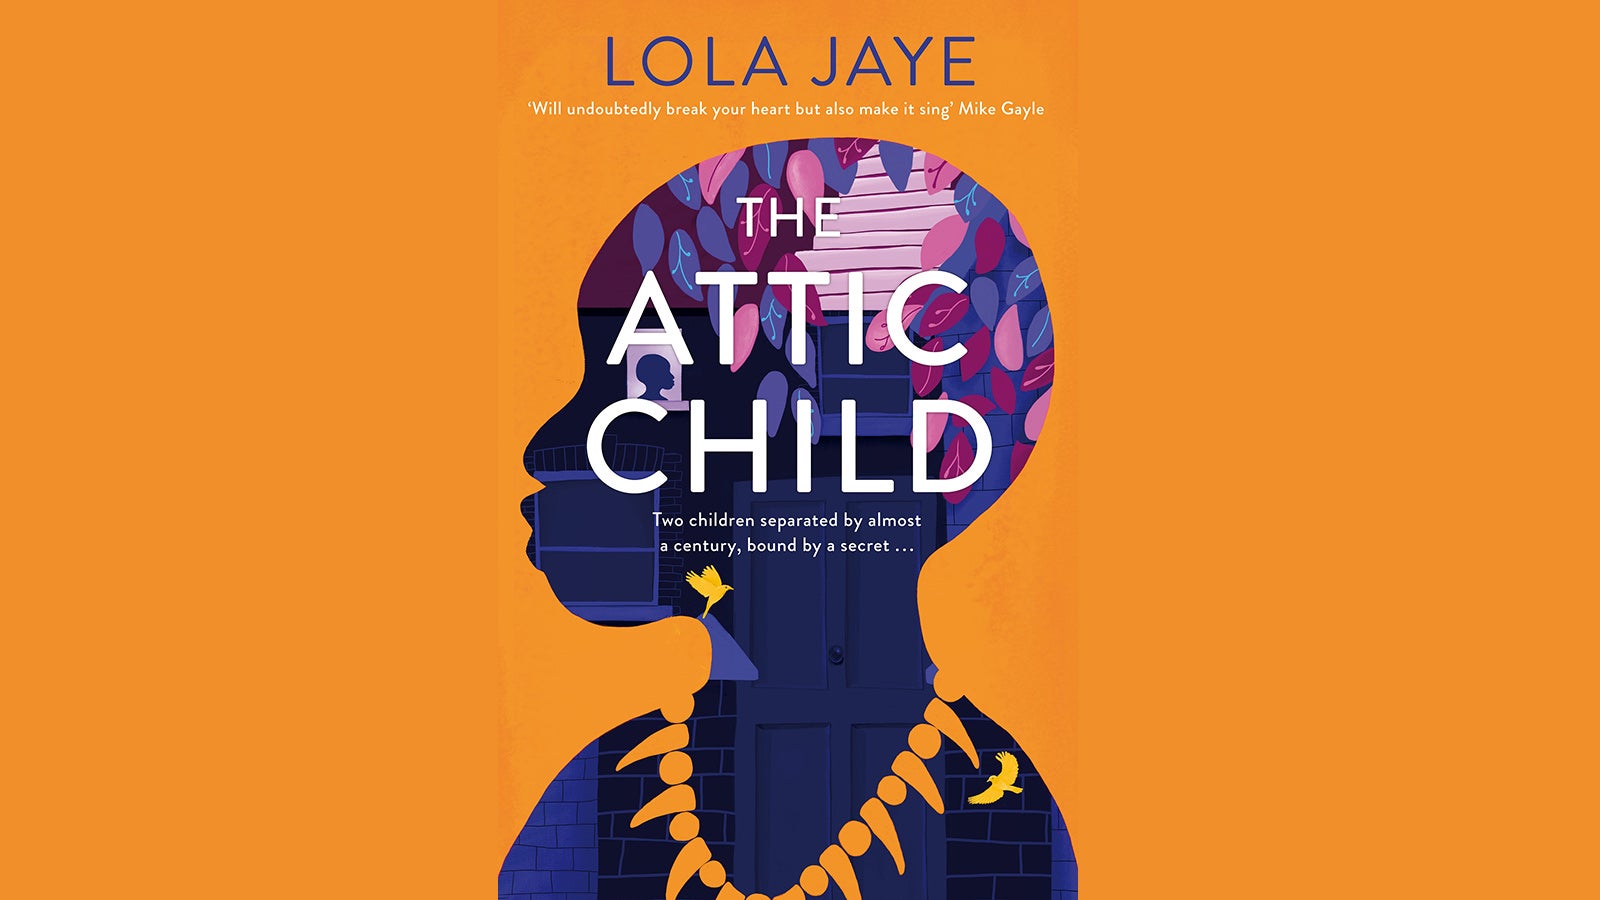 Book cover of The Attic Child against an orange background